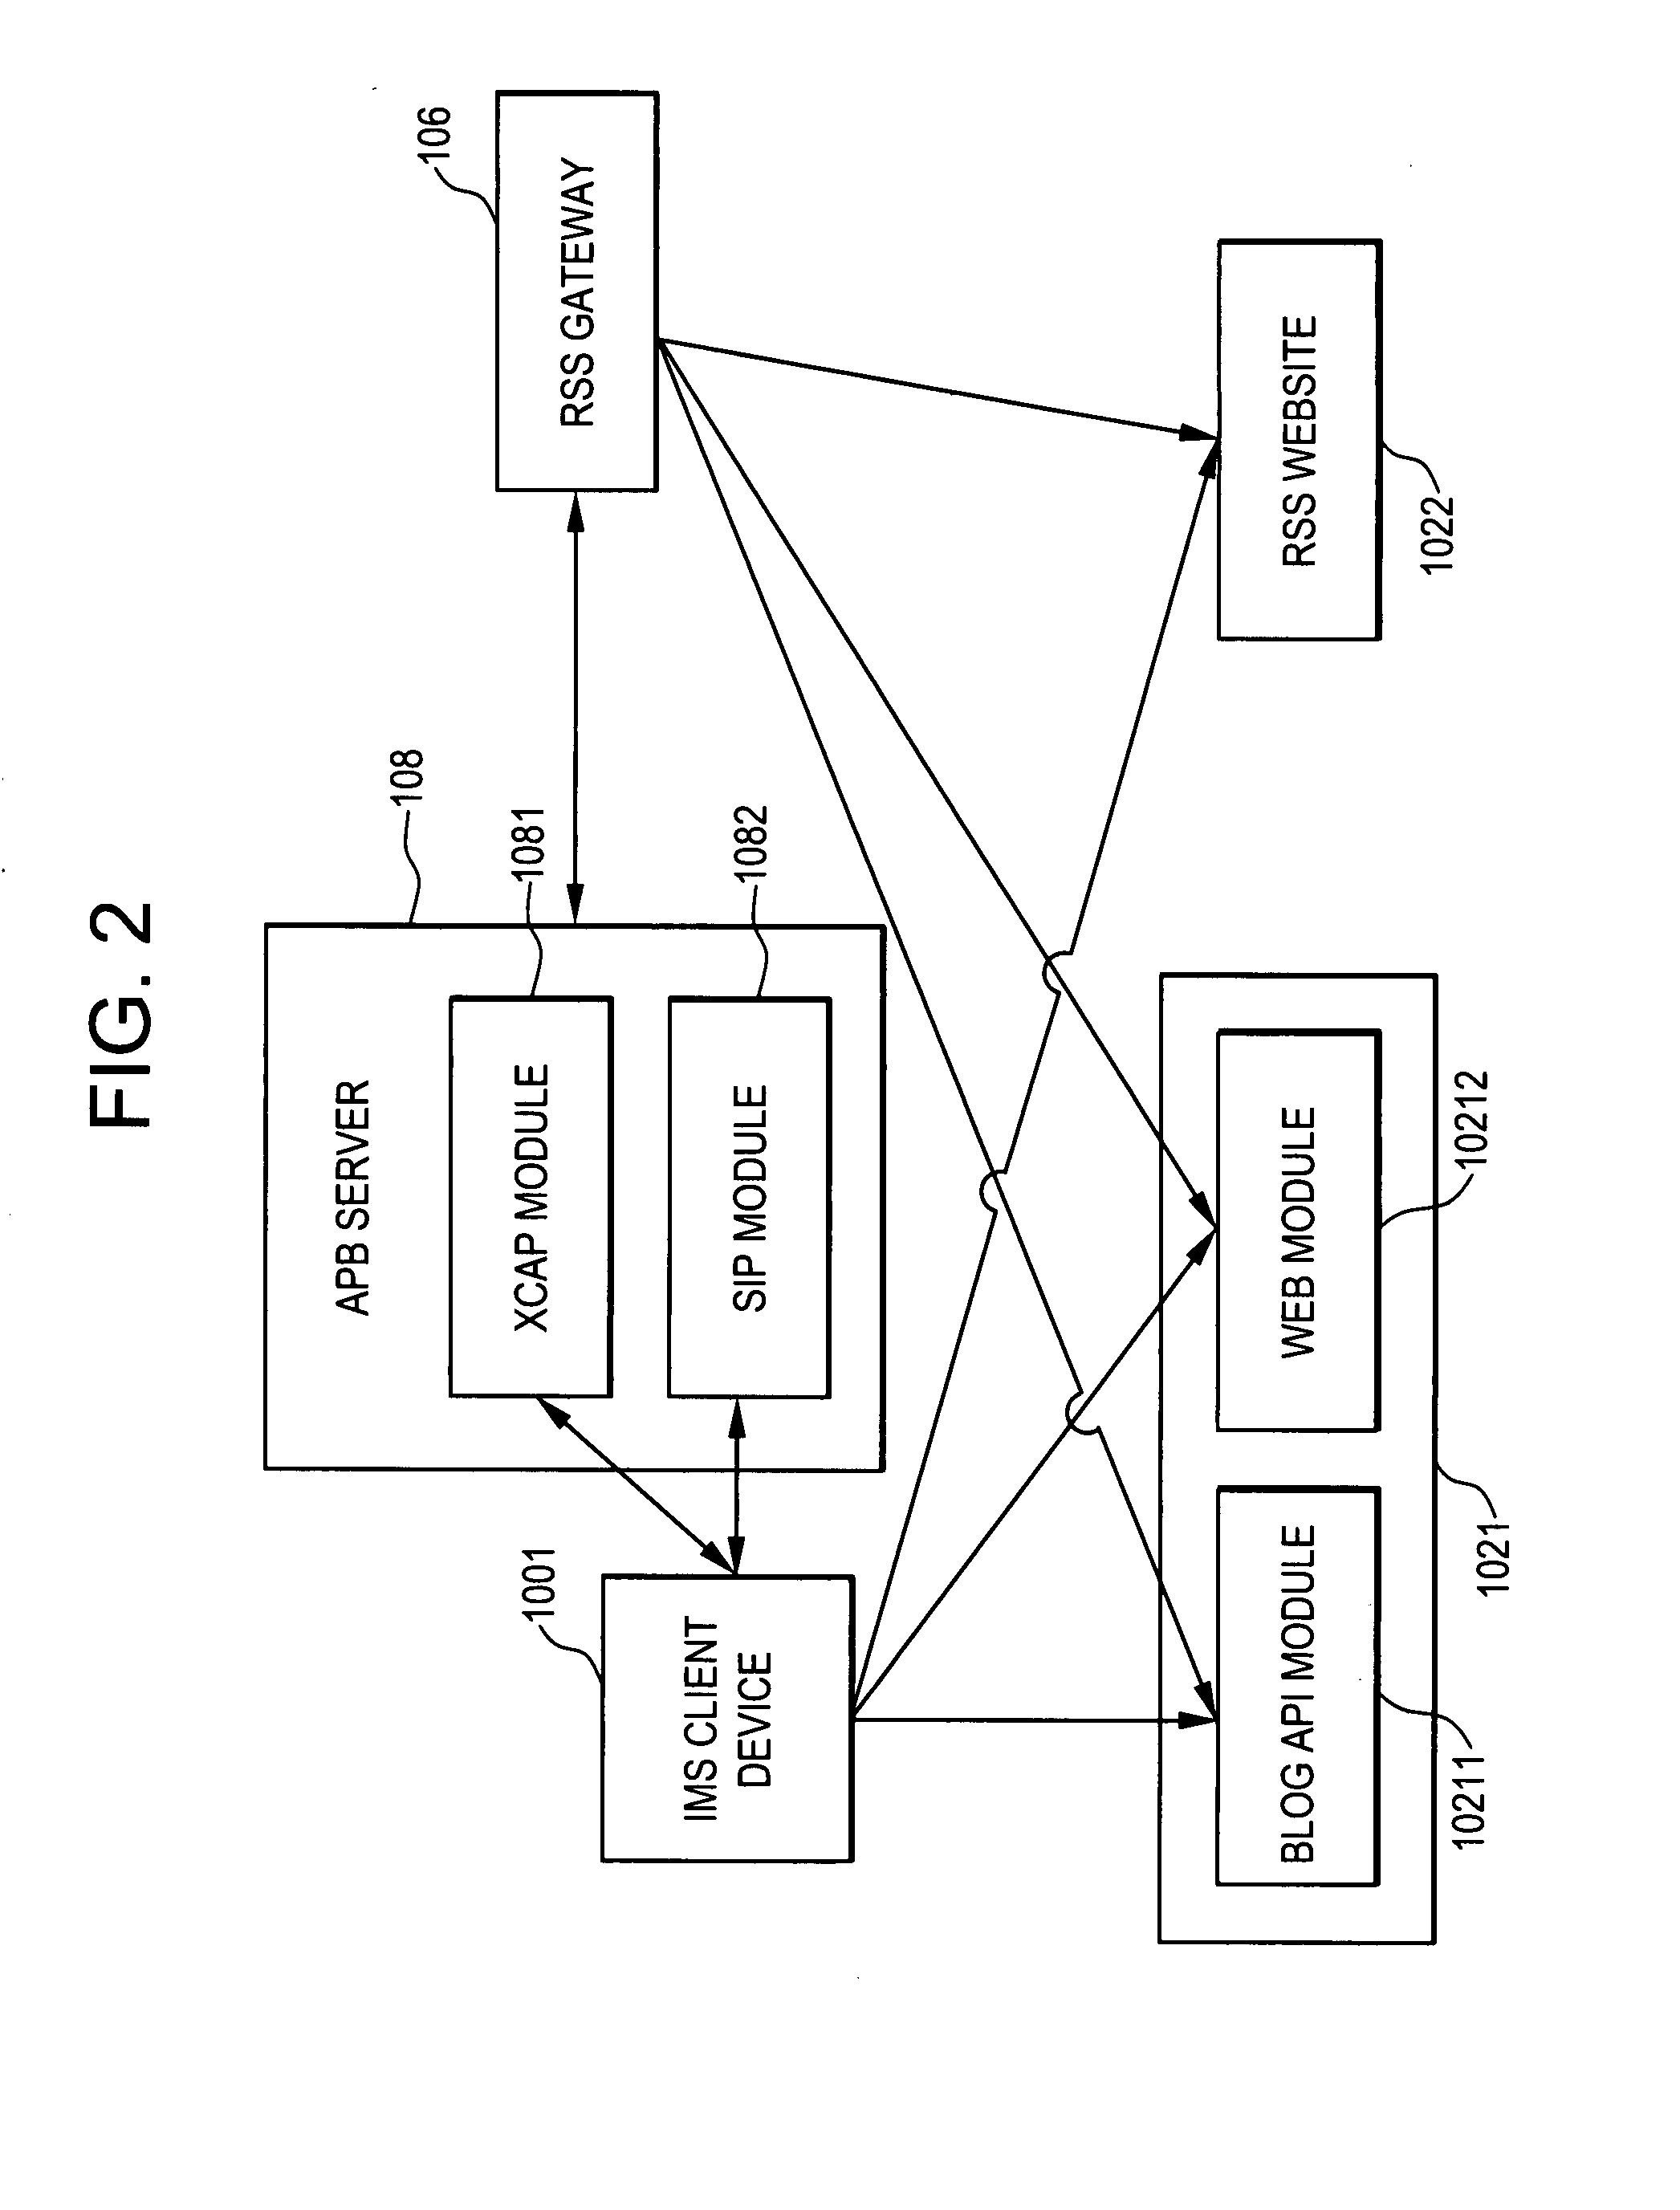 Mobile multimedia content sharing application system